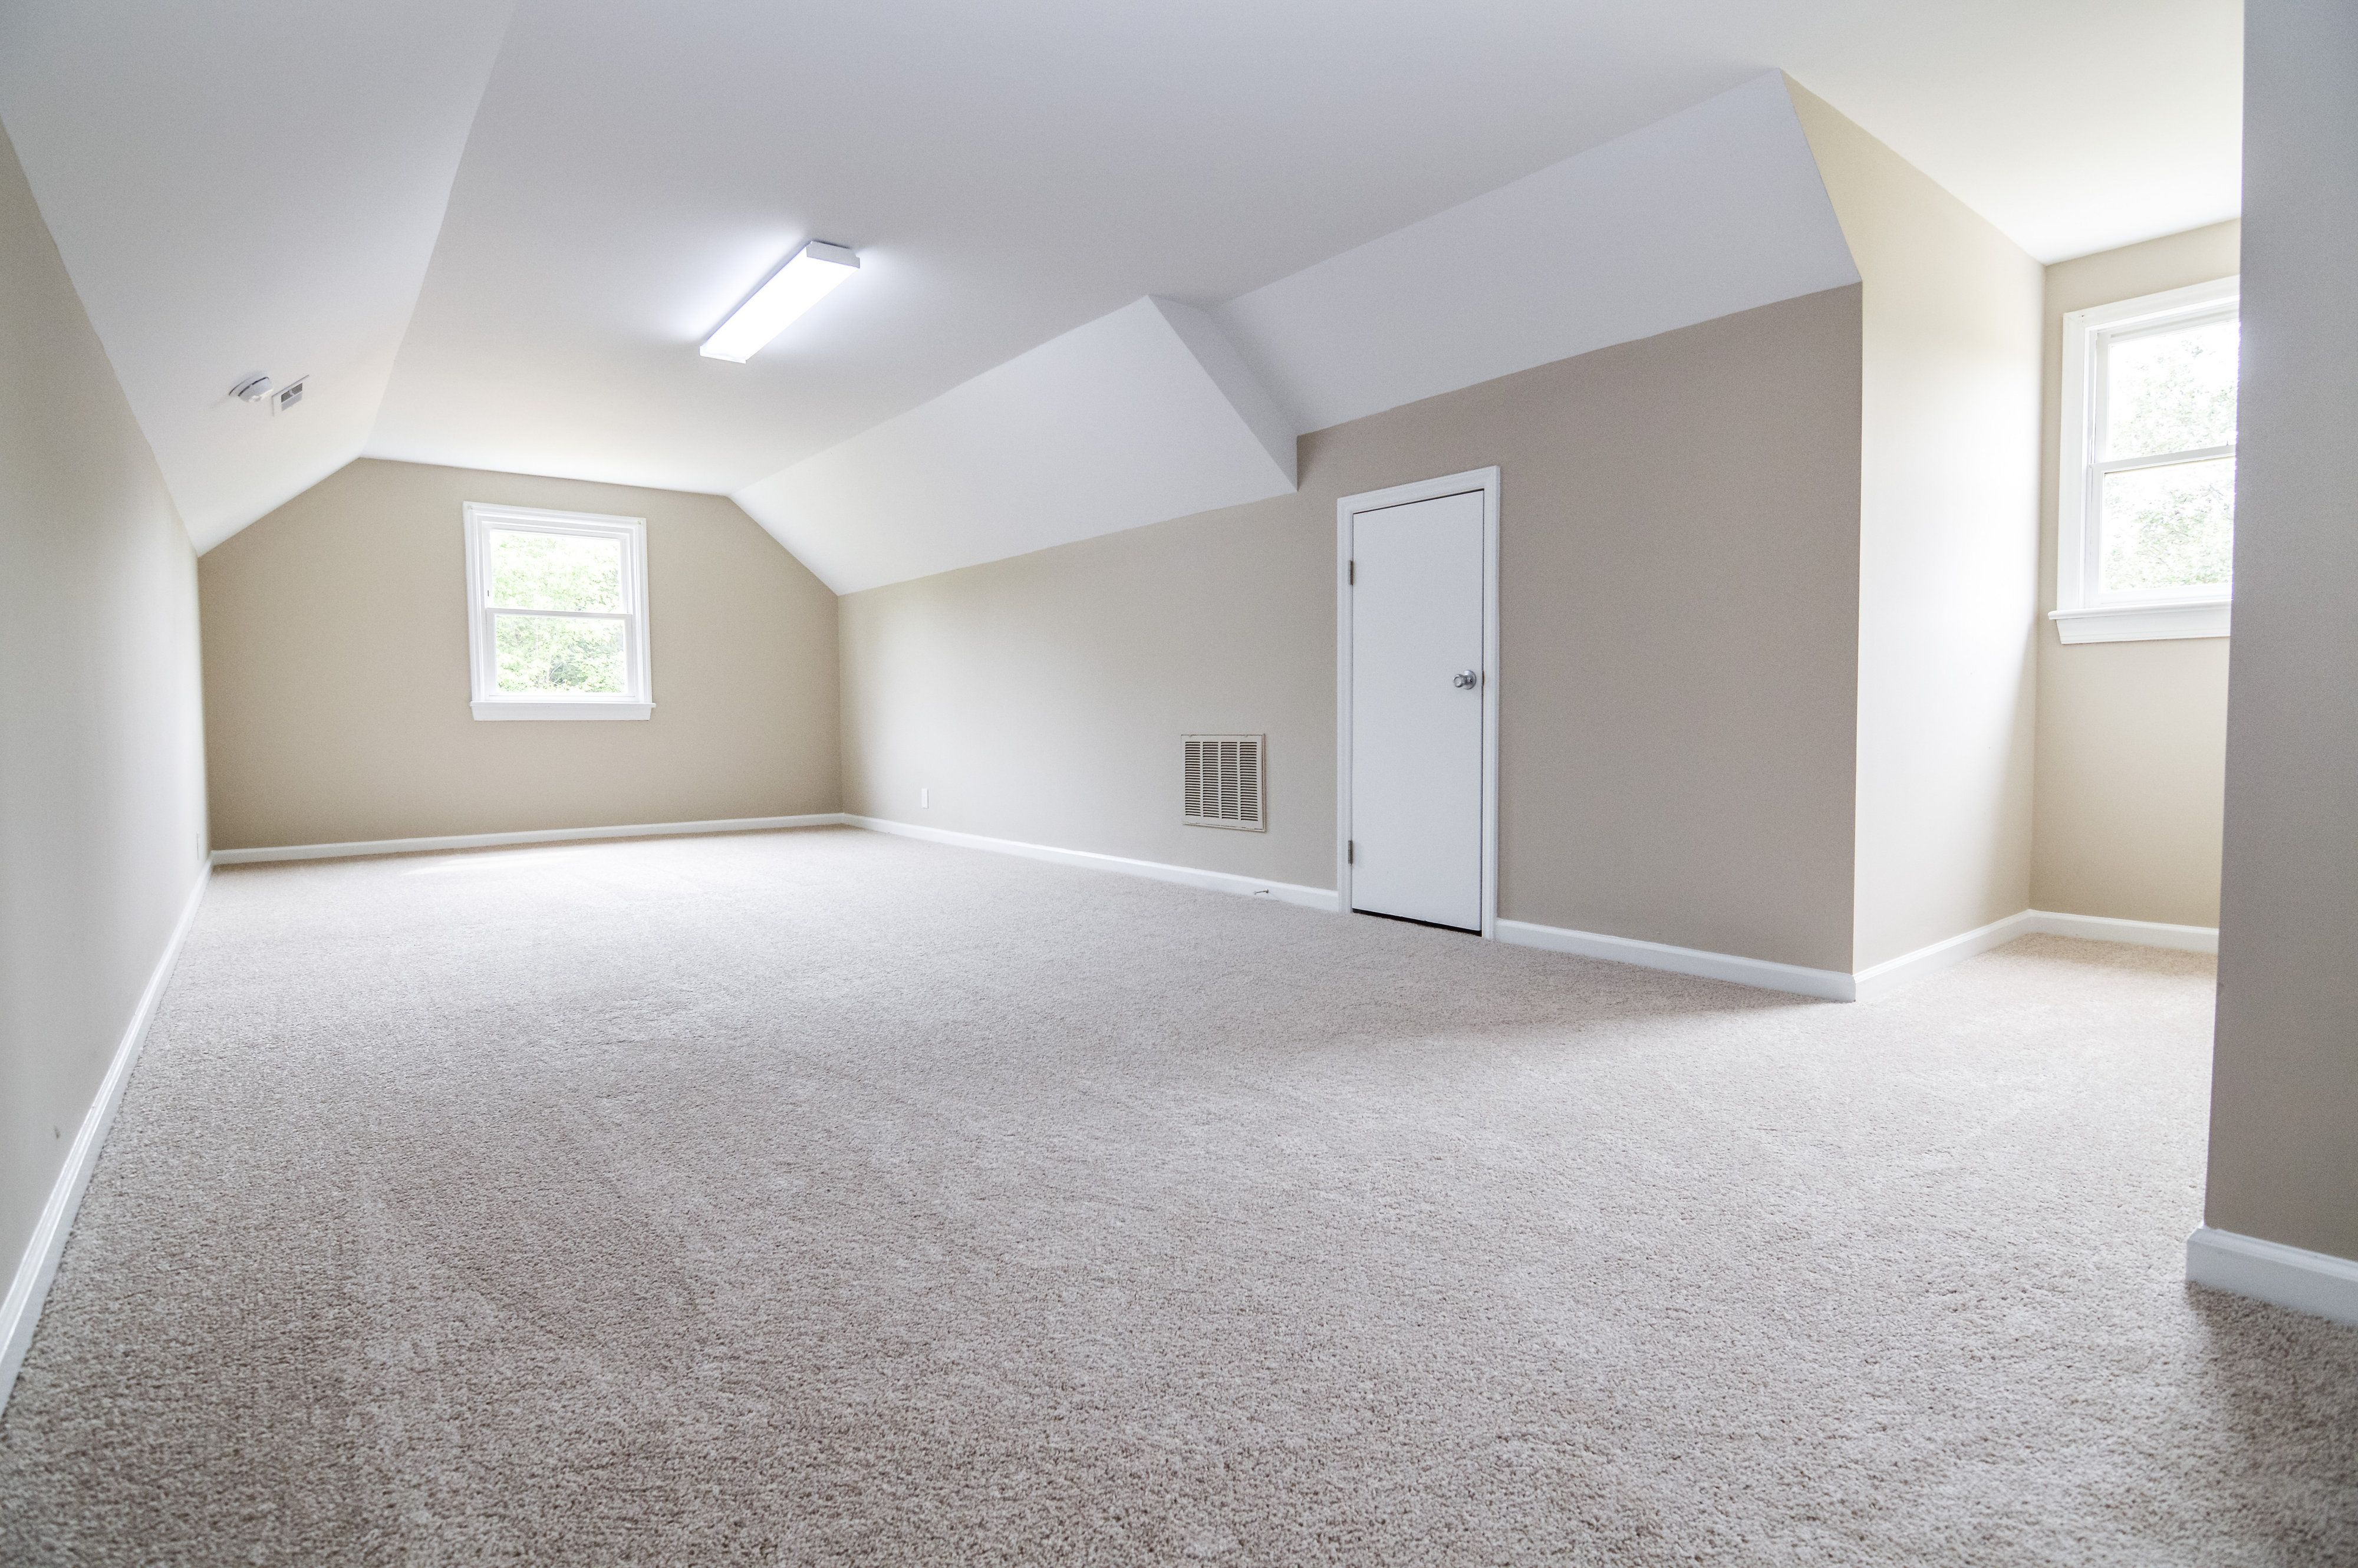 Carpet In Captain One 38 Color 1784 Sherwin Williams 7036 throughout dimensions 4000 X 2660